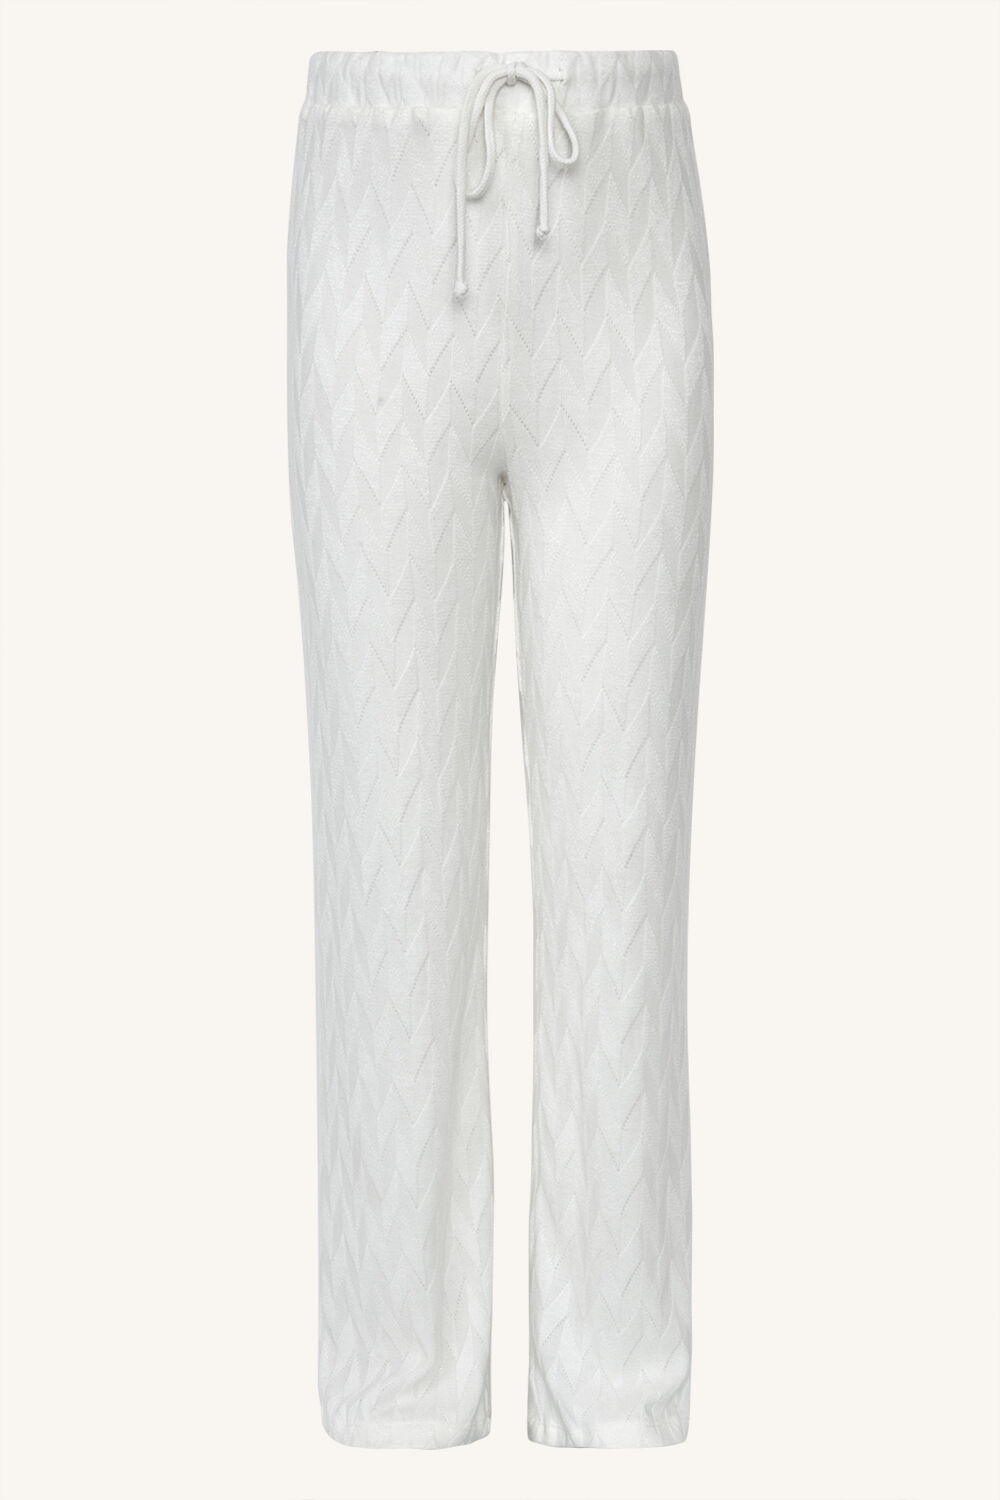 Girls Sienna Knit Pants in Ivory